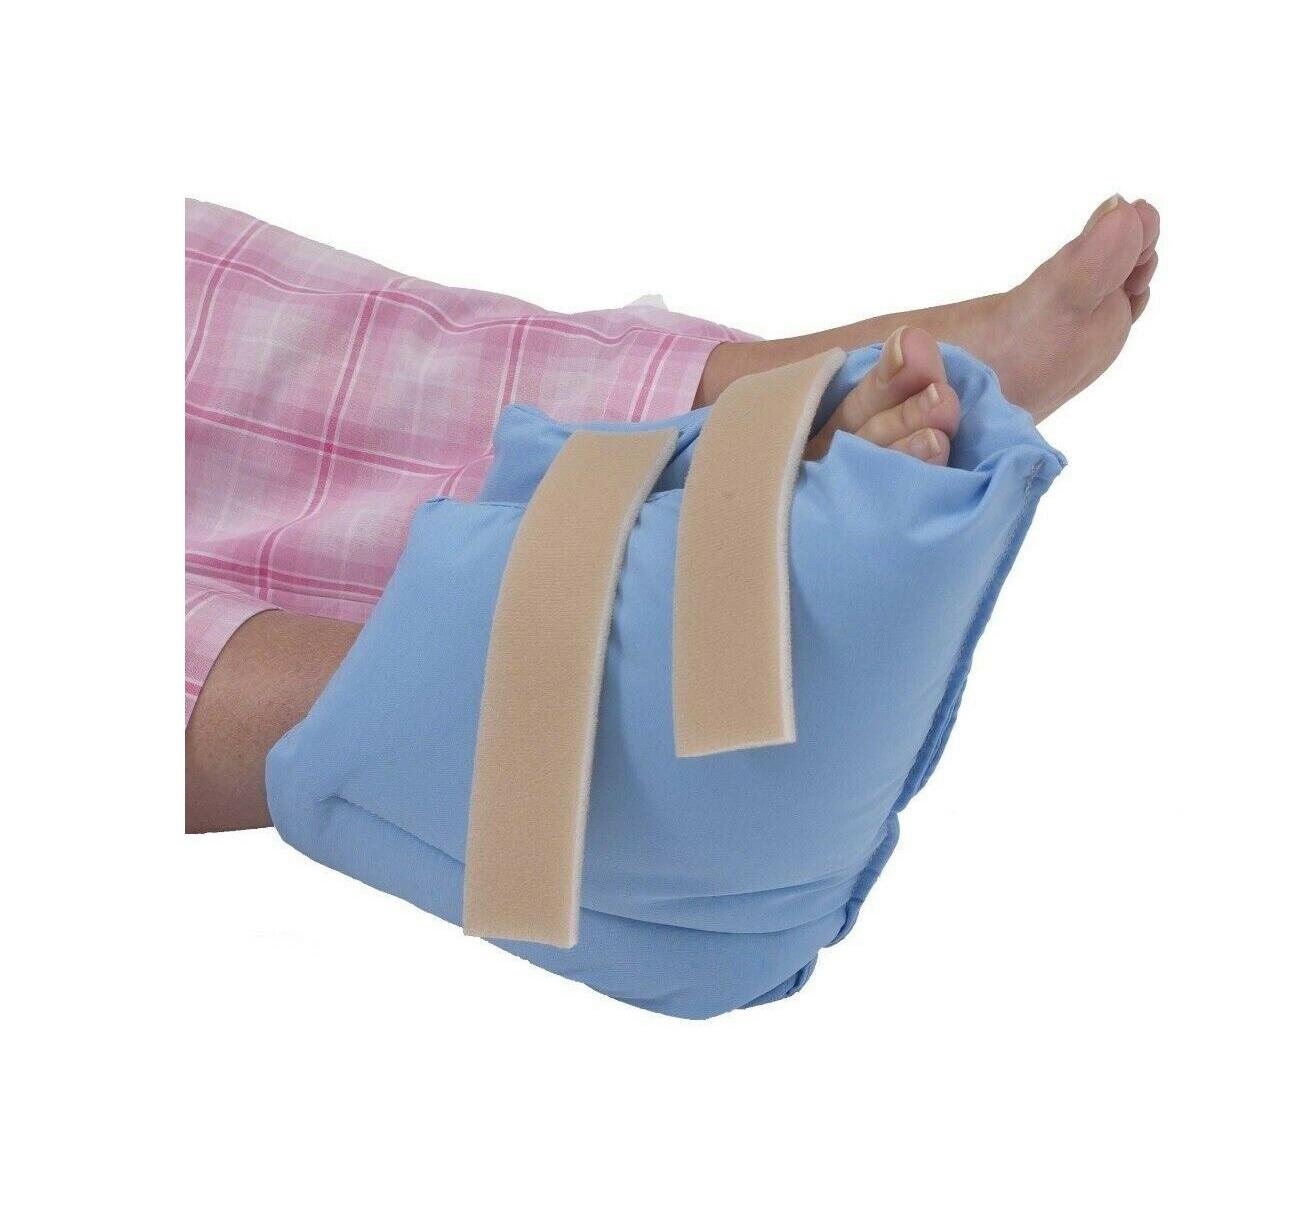 Heel Cushion Protector Pillow Relieve Pressure Sore Ulcers Foot